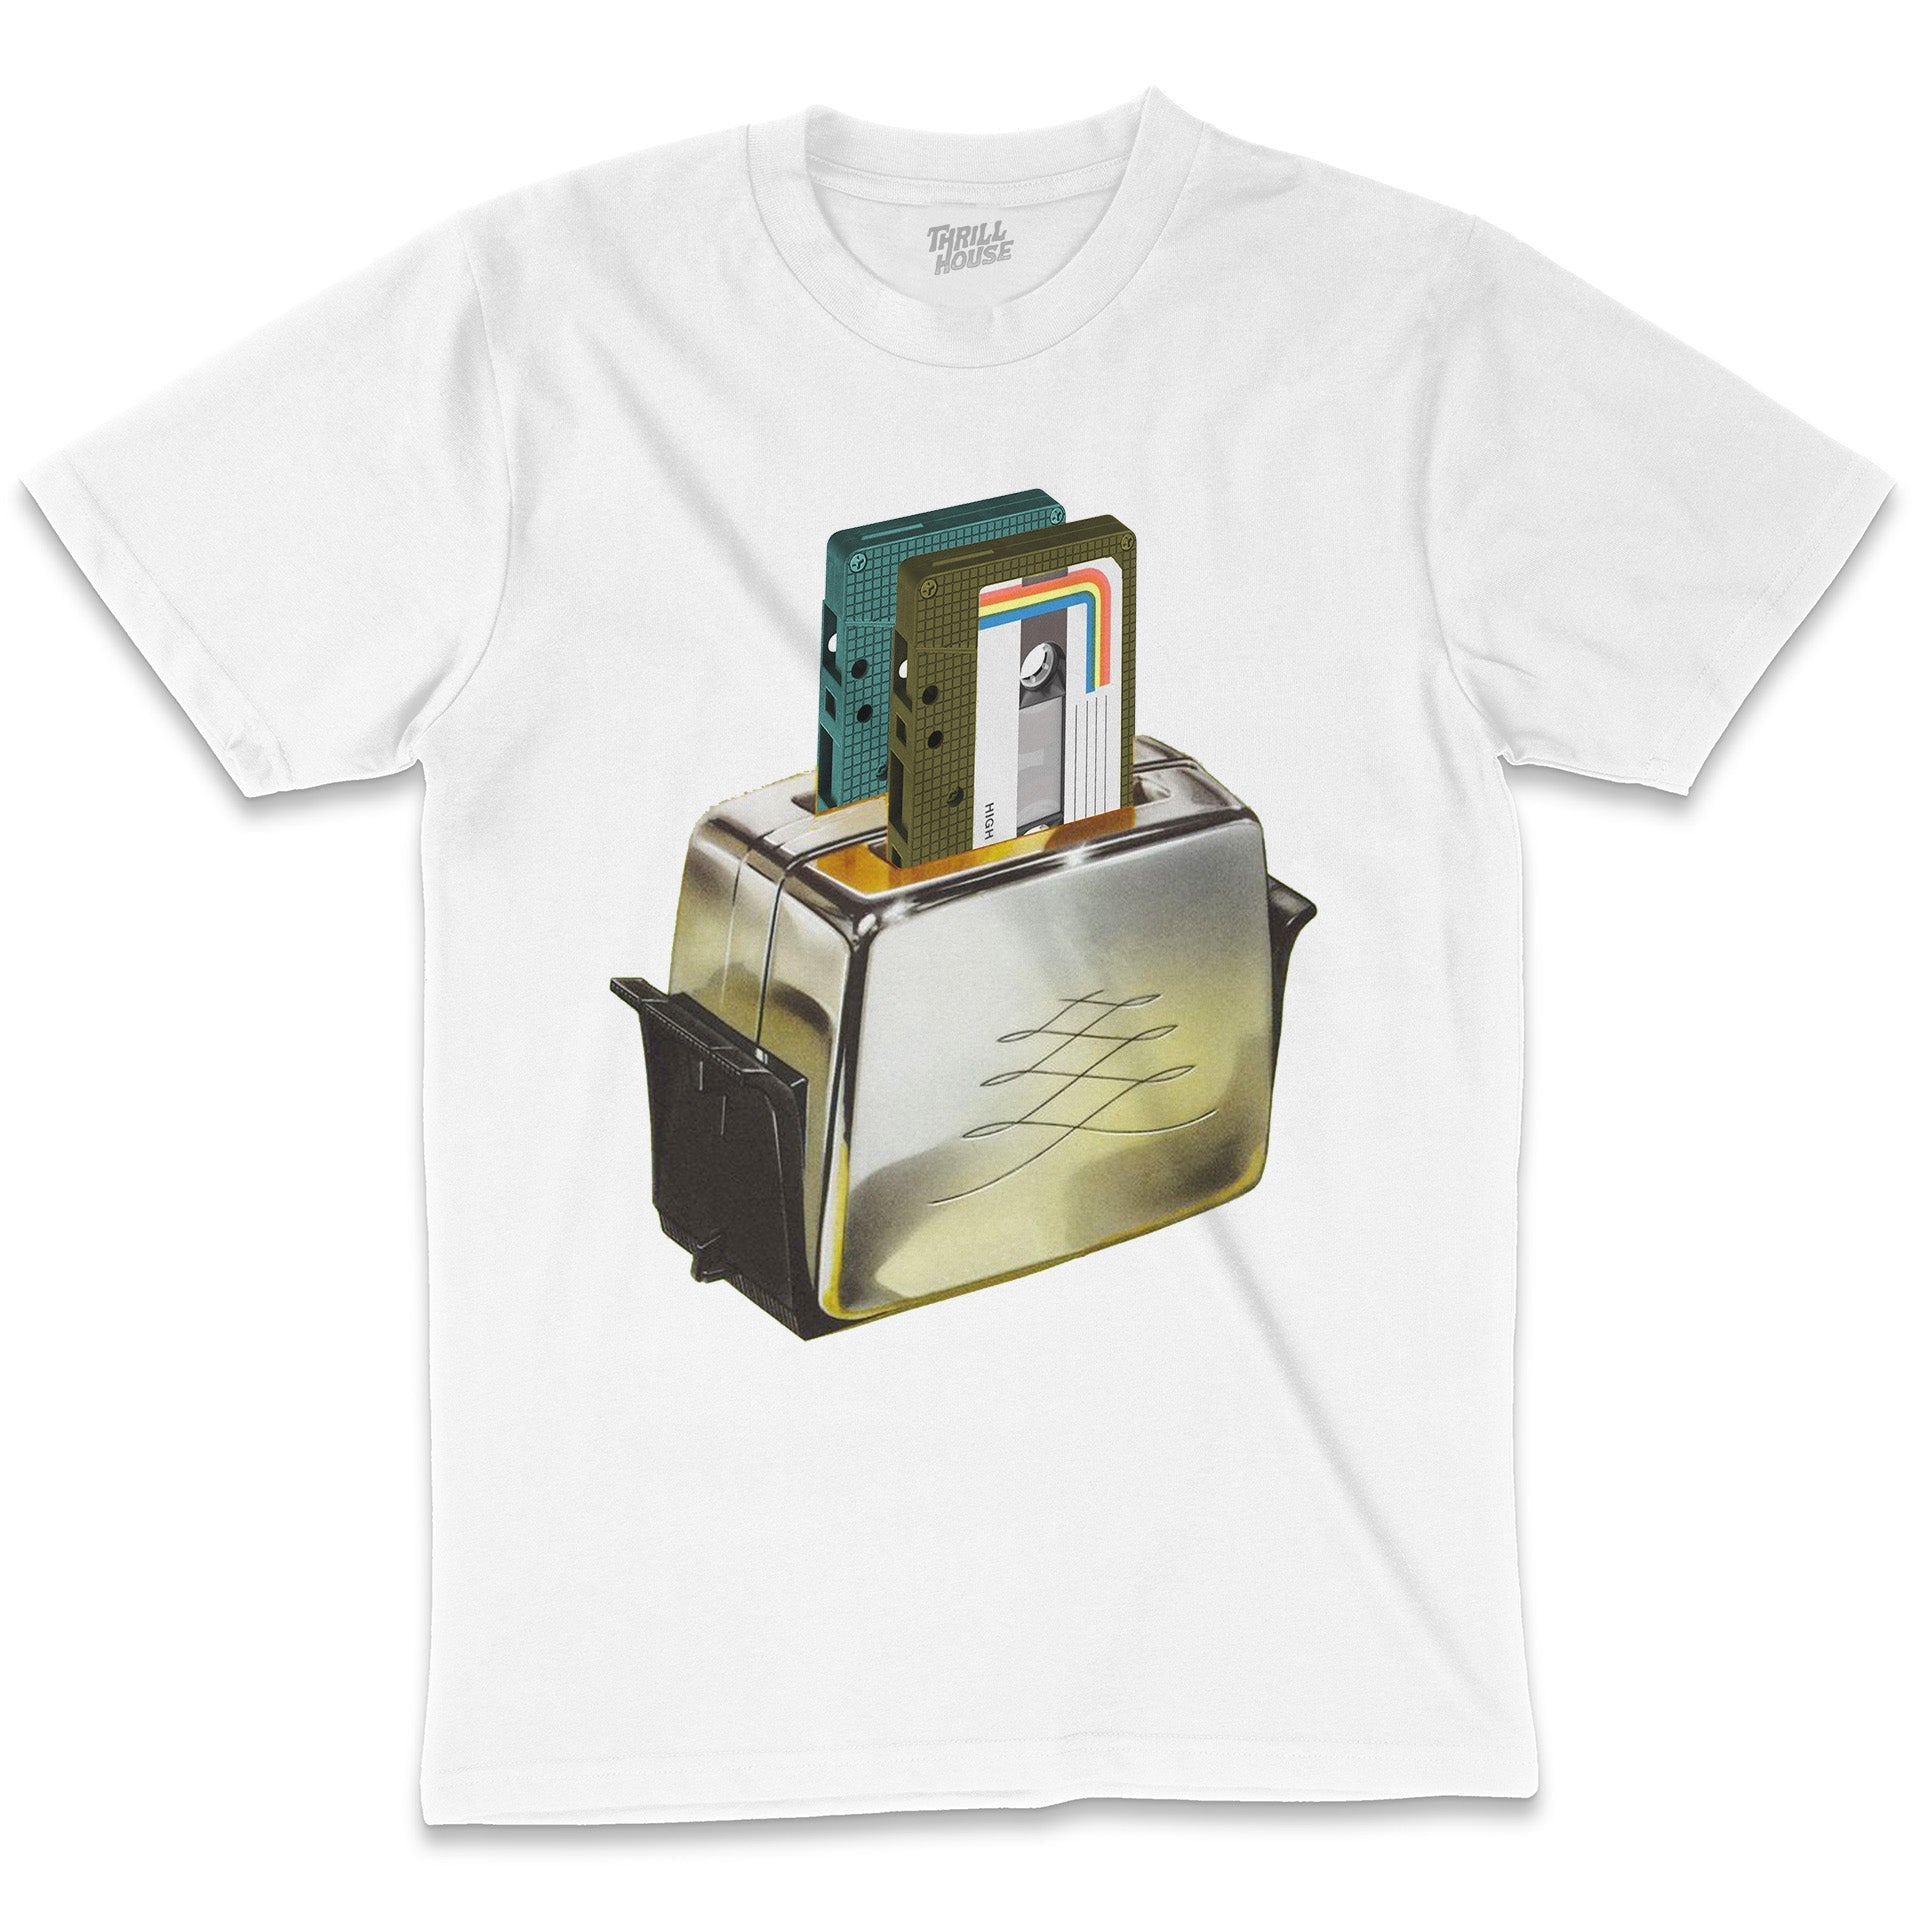 Bread of Music Toaster Cassette Pun Funny Artsy Artistic Food Retro Vintage Cotton T-Shirt